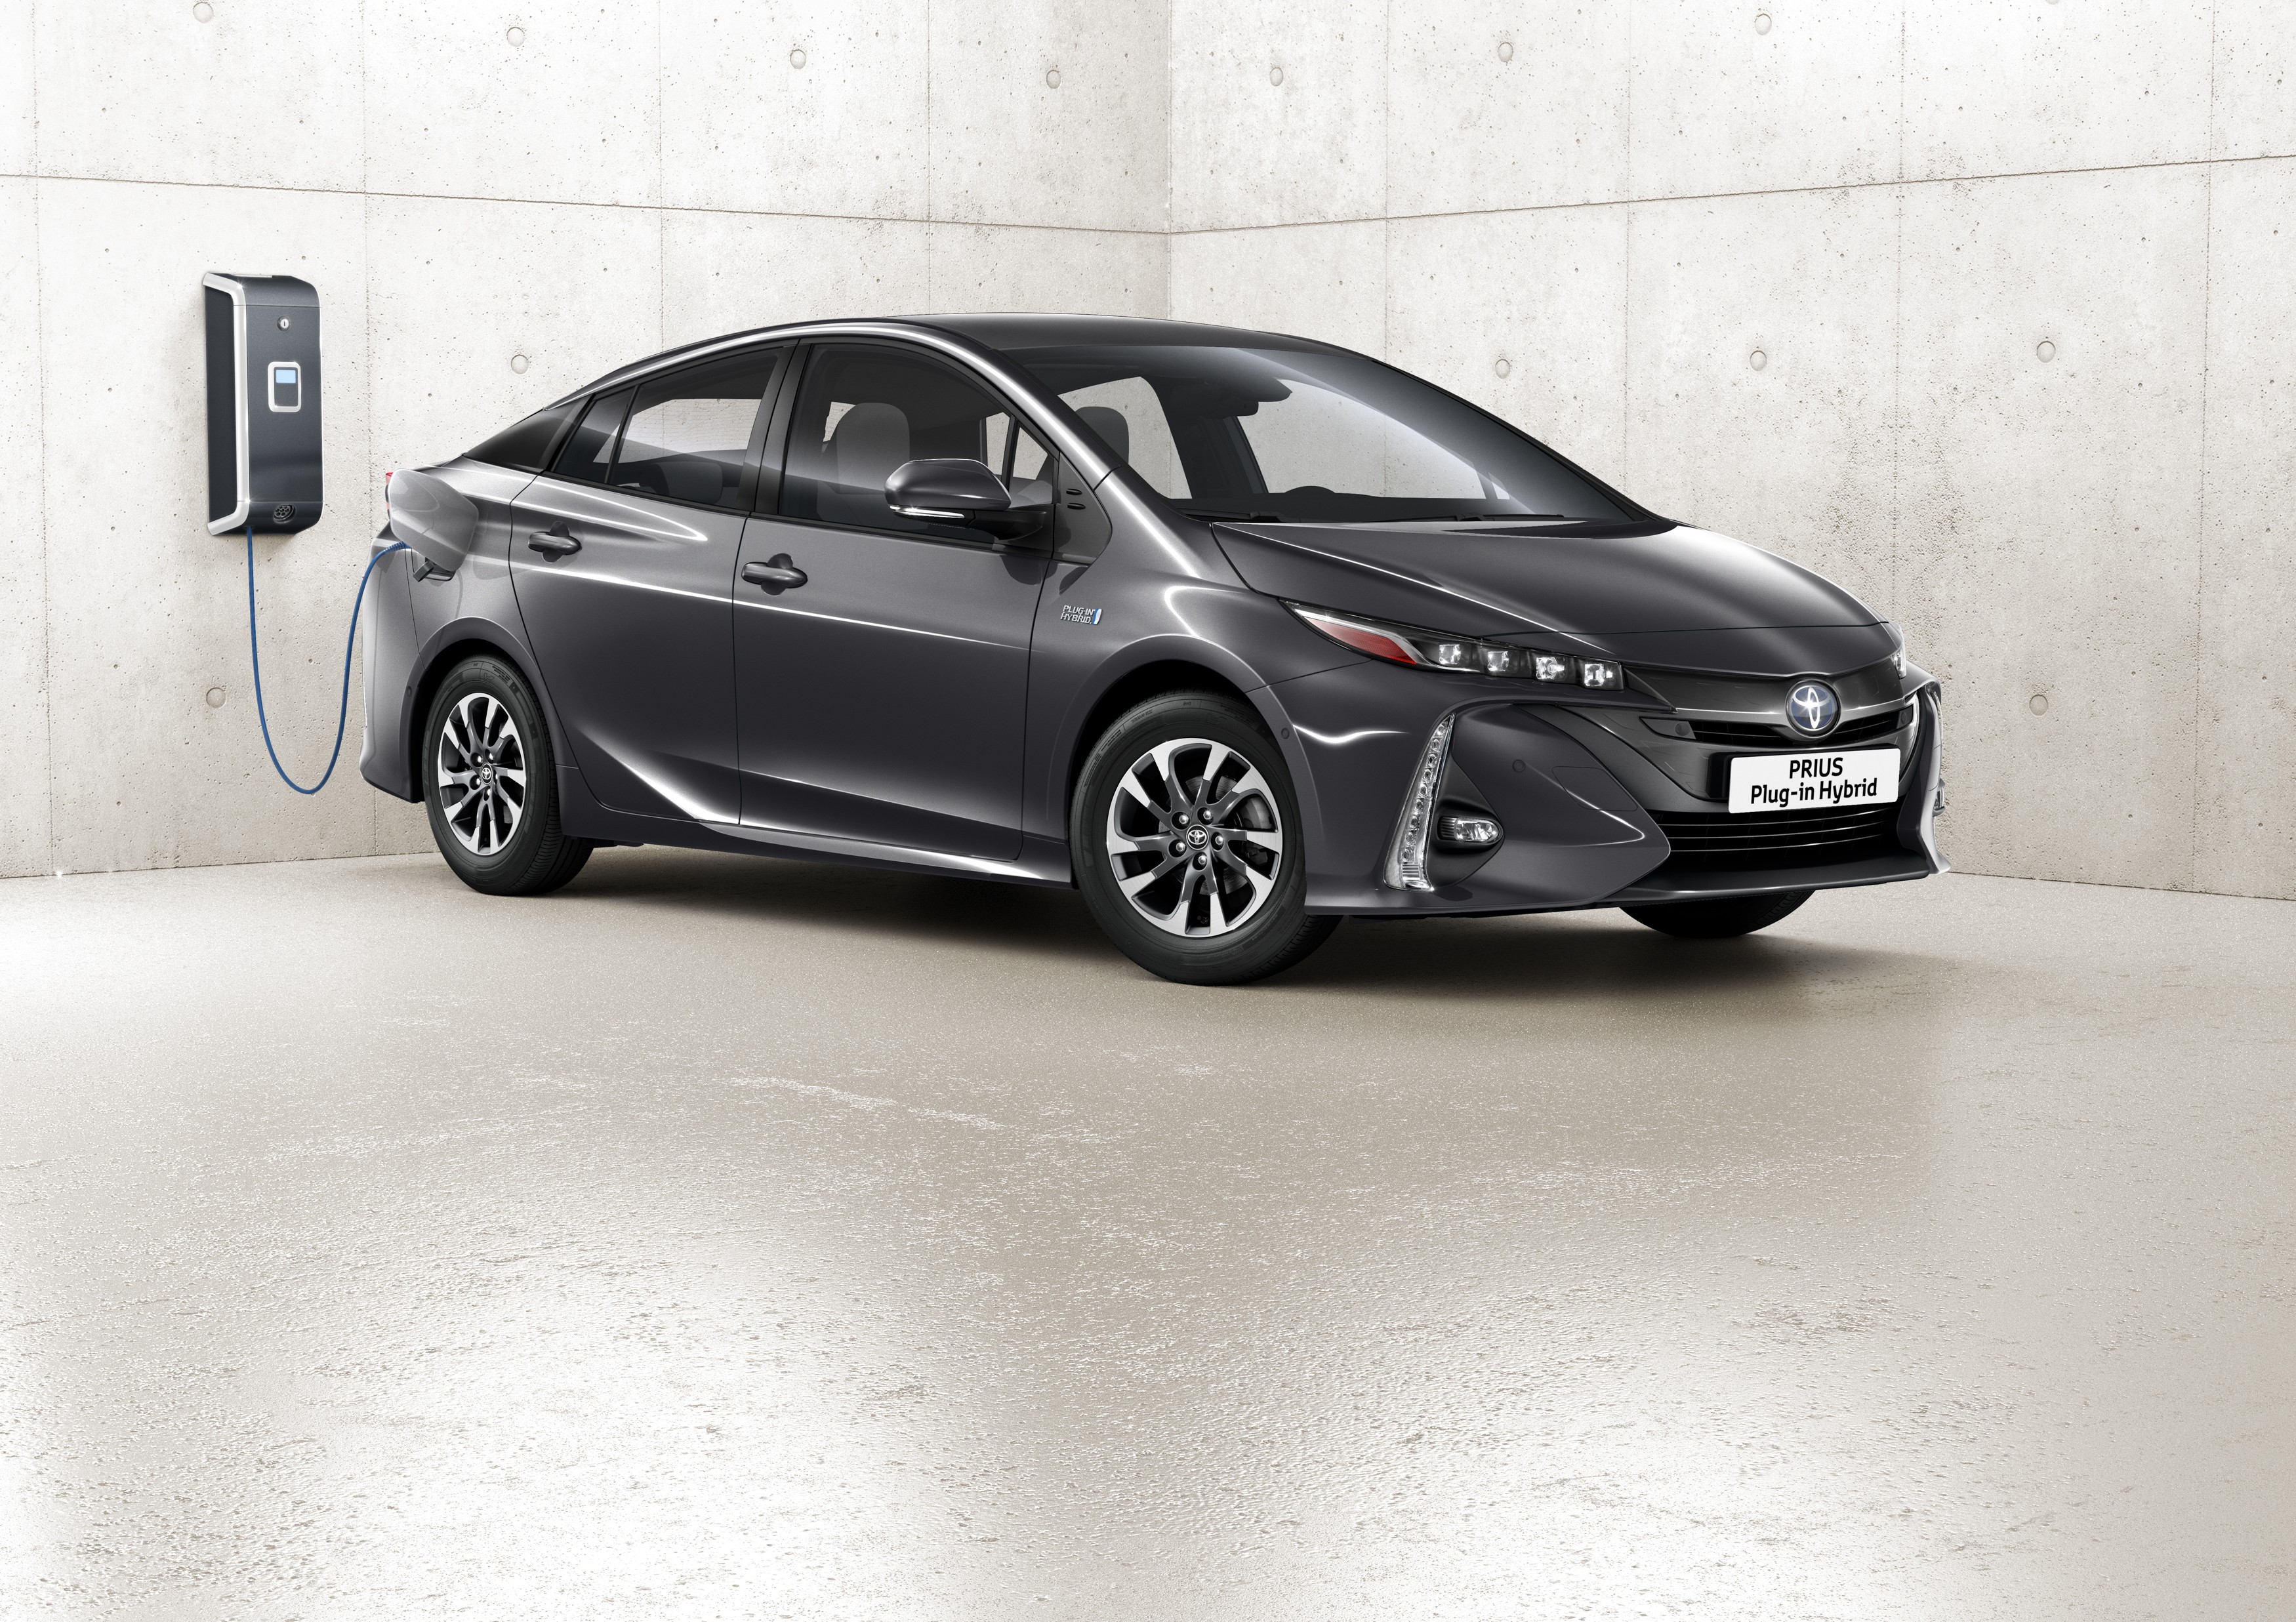 Toyota Prius Plug-in Hybrid mod specifications